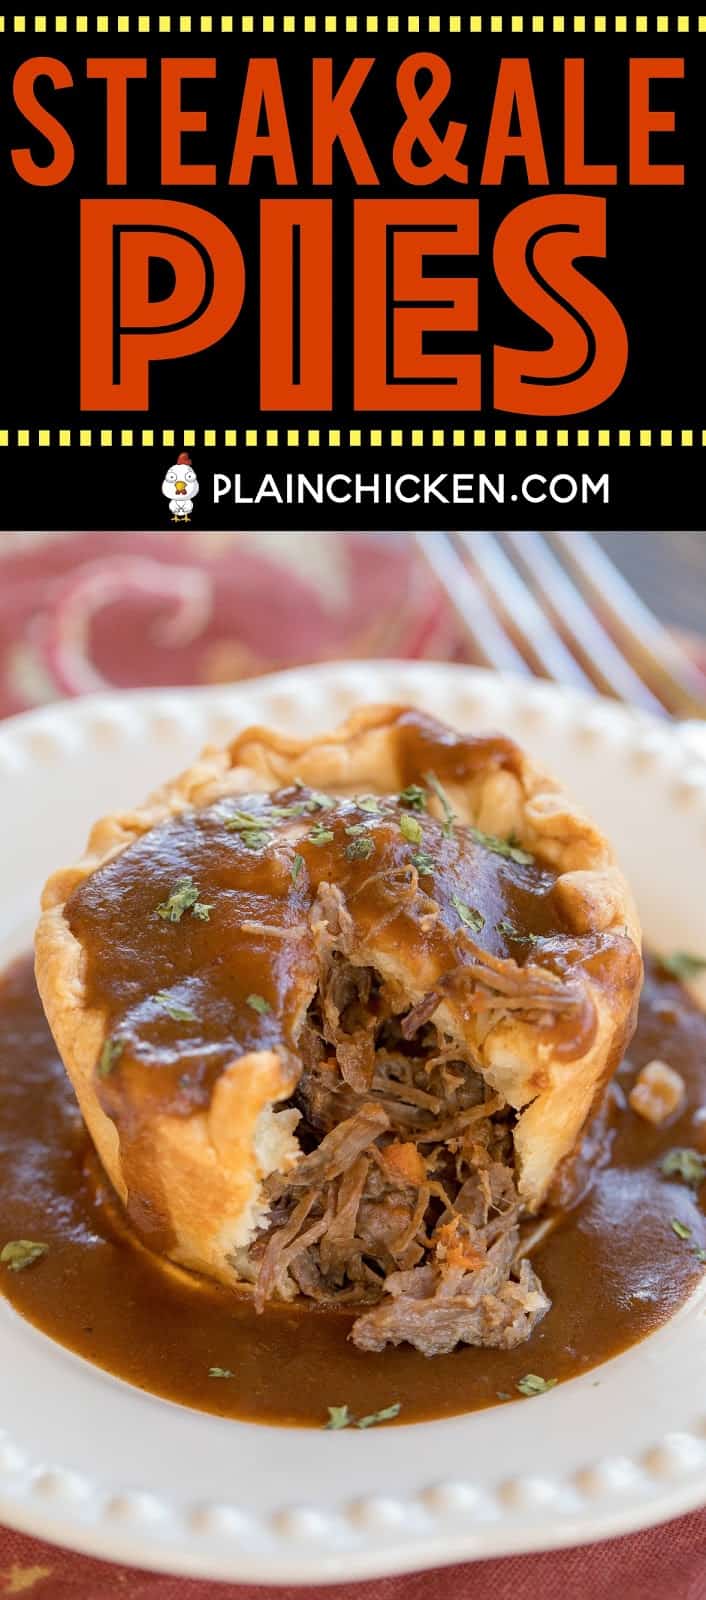 Mini Steak & Ale Pies - Guinness pot roast in pie crust baked in a muffin pan. Inspired by our trip to London, England. These taste better than any of the meat pies we ate in the London pubs. YUM! Slow cooked pot roast, pie crust and Guinness gravy. Can make ahead and freeze for a quick meal later! #london #guinness #steak #meatpie